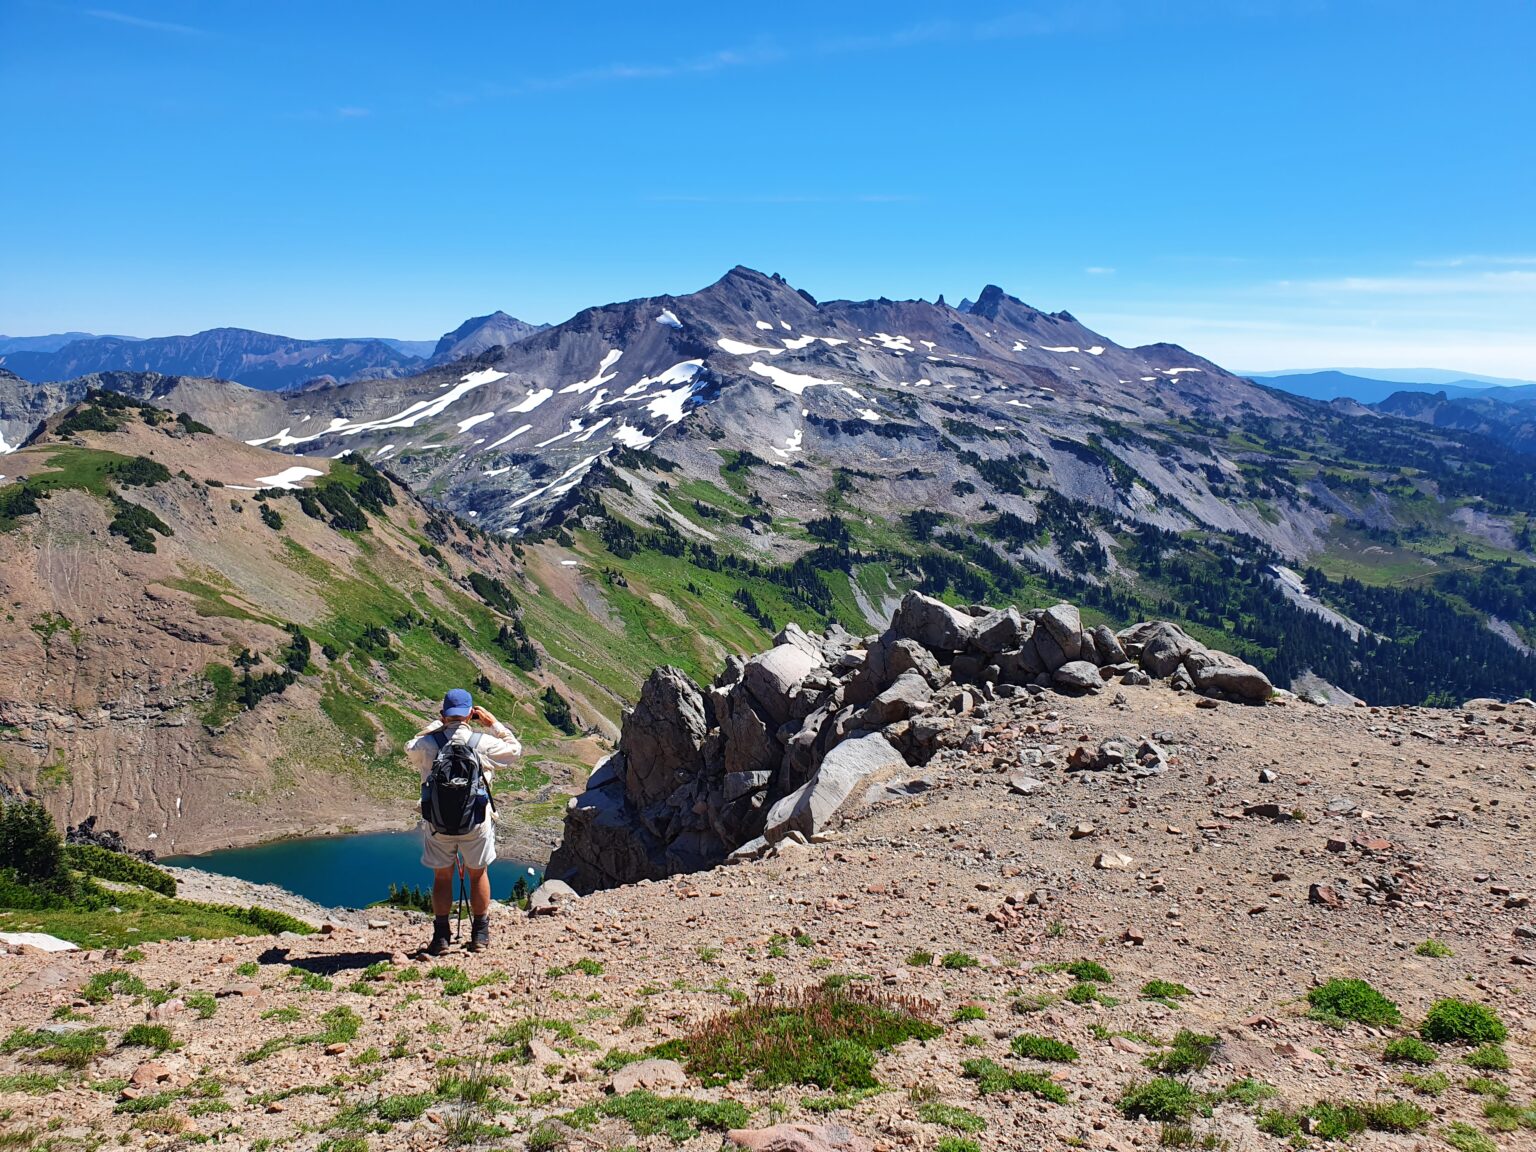 Taking in the view of Goat Rocks Wilderness